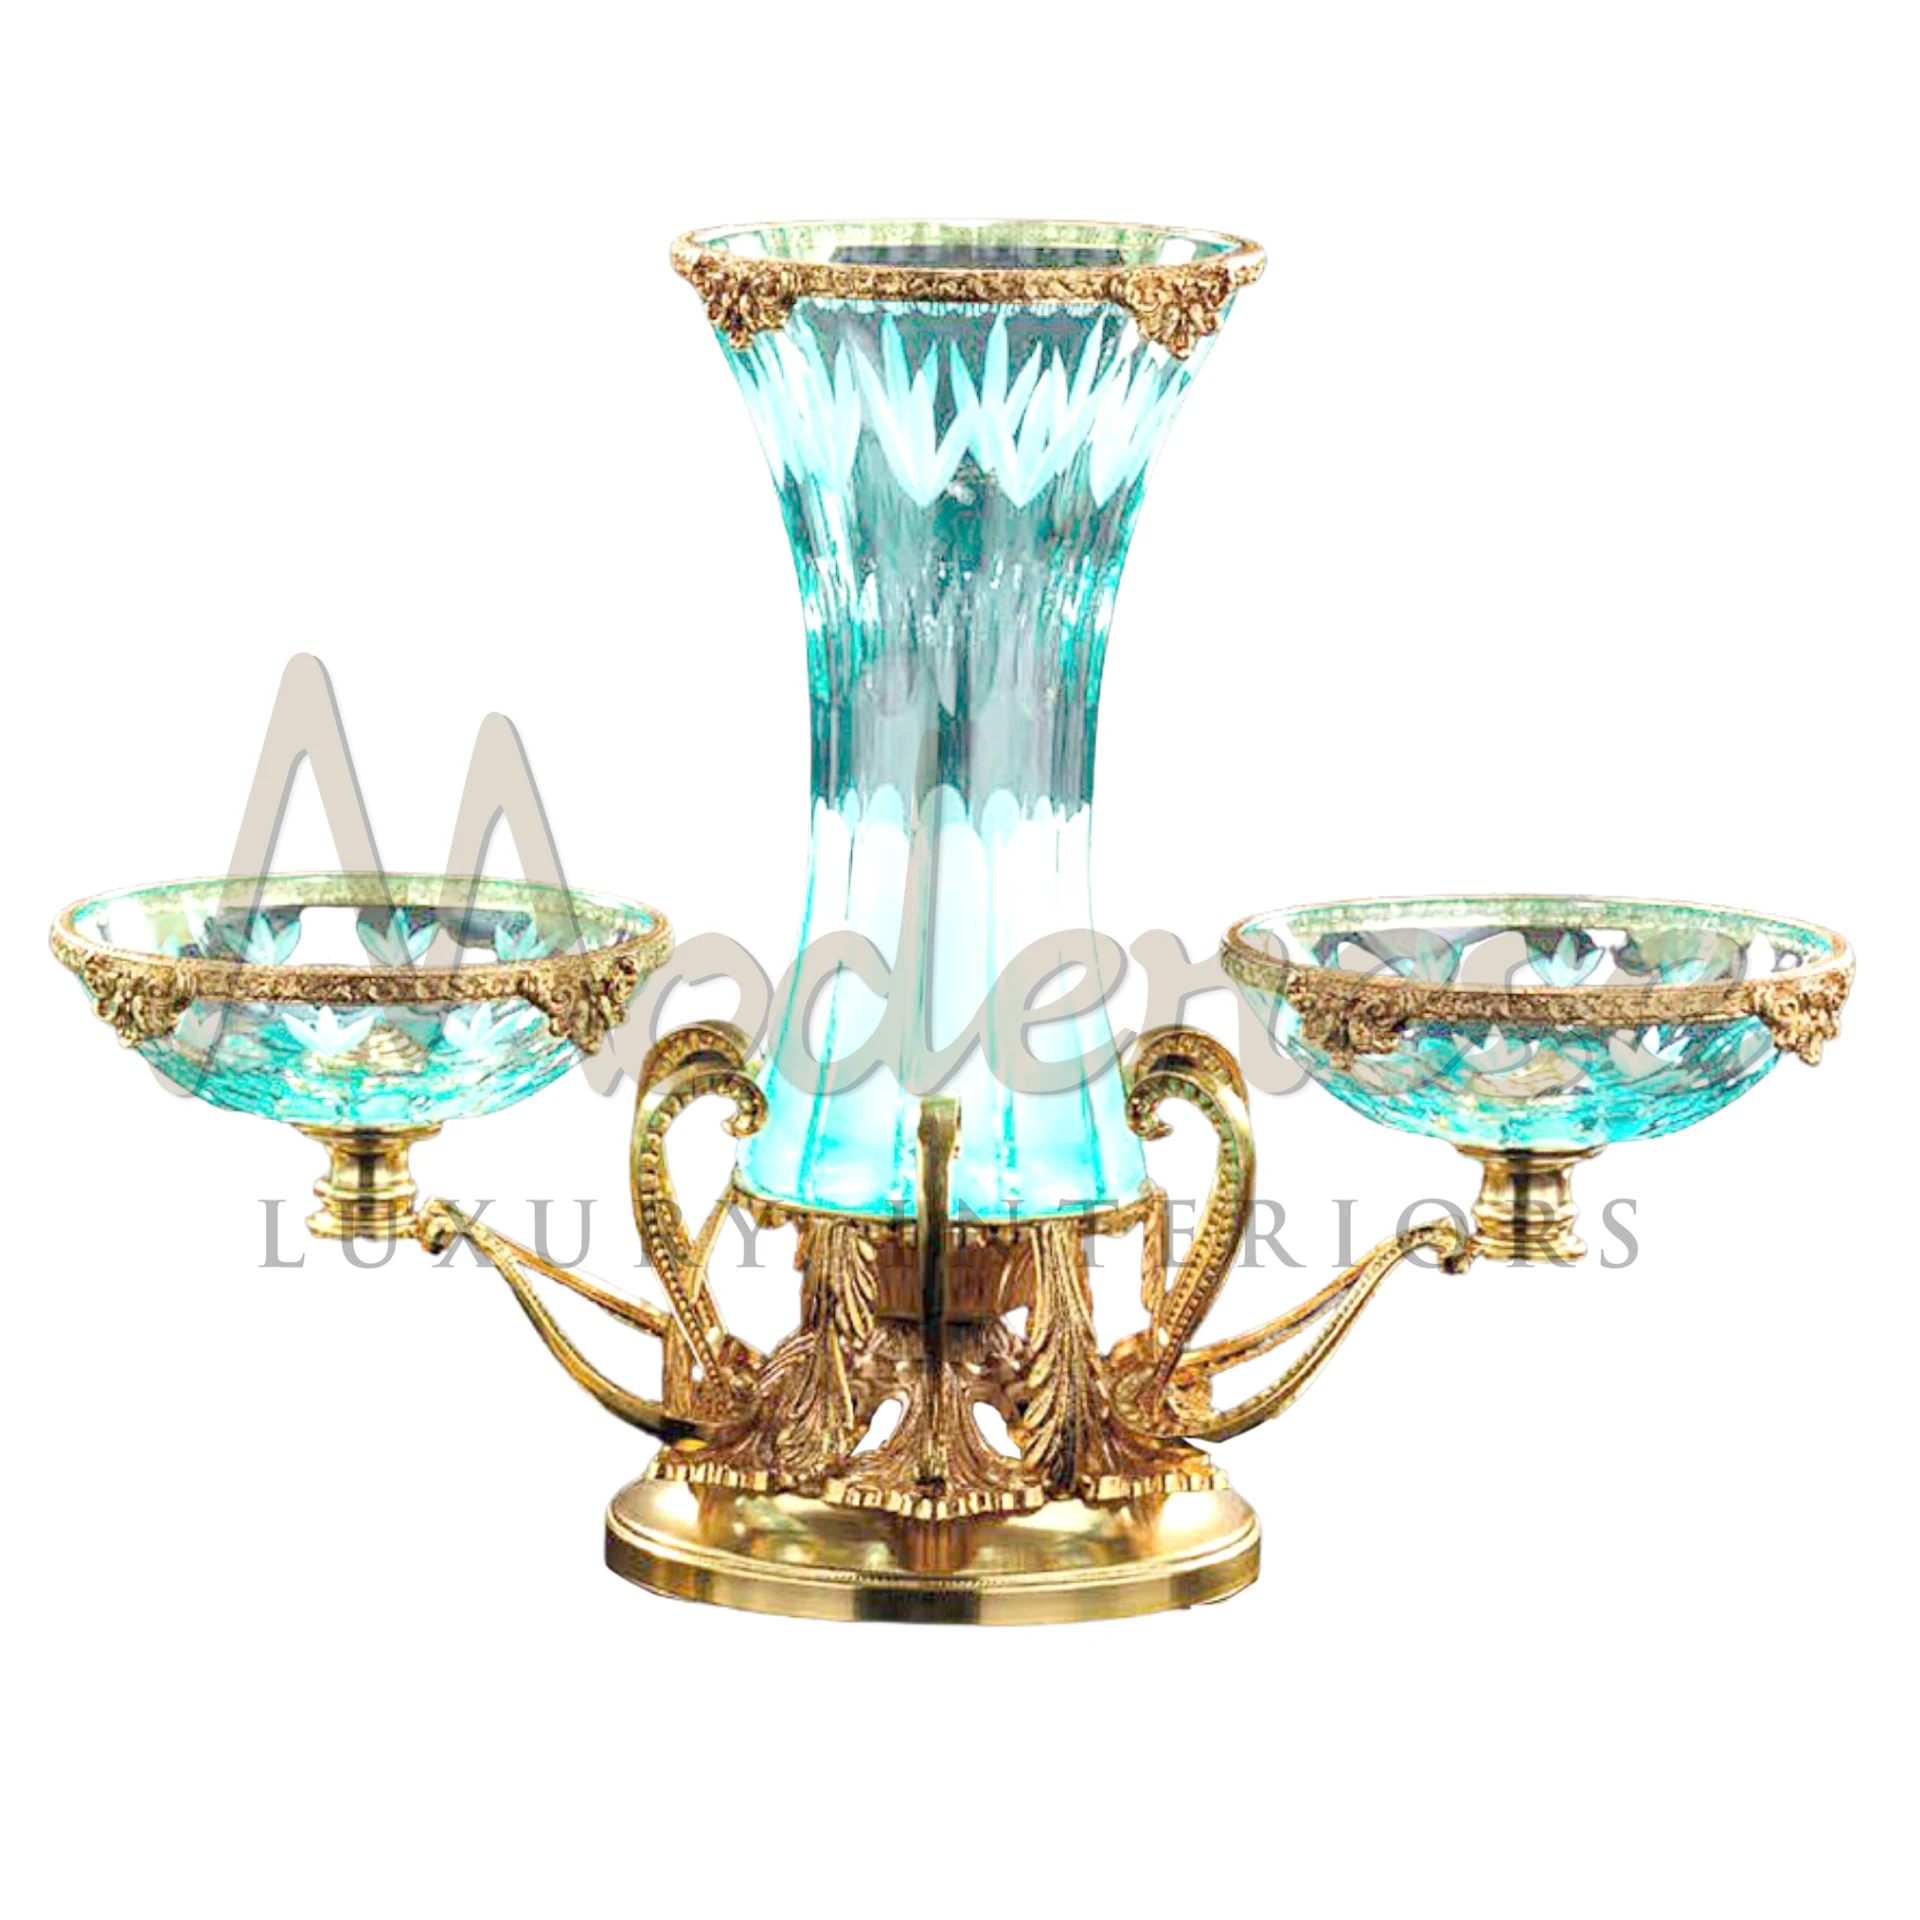 Luxury Turquoise Vase in fine porcelain or glass, perfect for interior designers and luxury interiors, showcasing baroque and classic style elegance.






